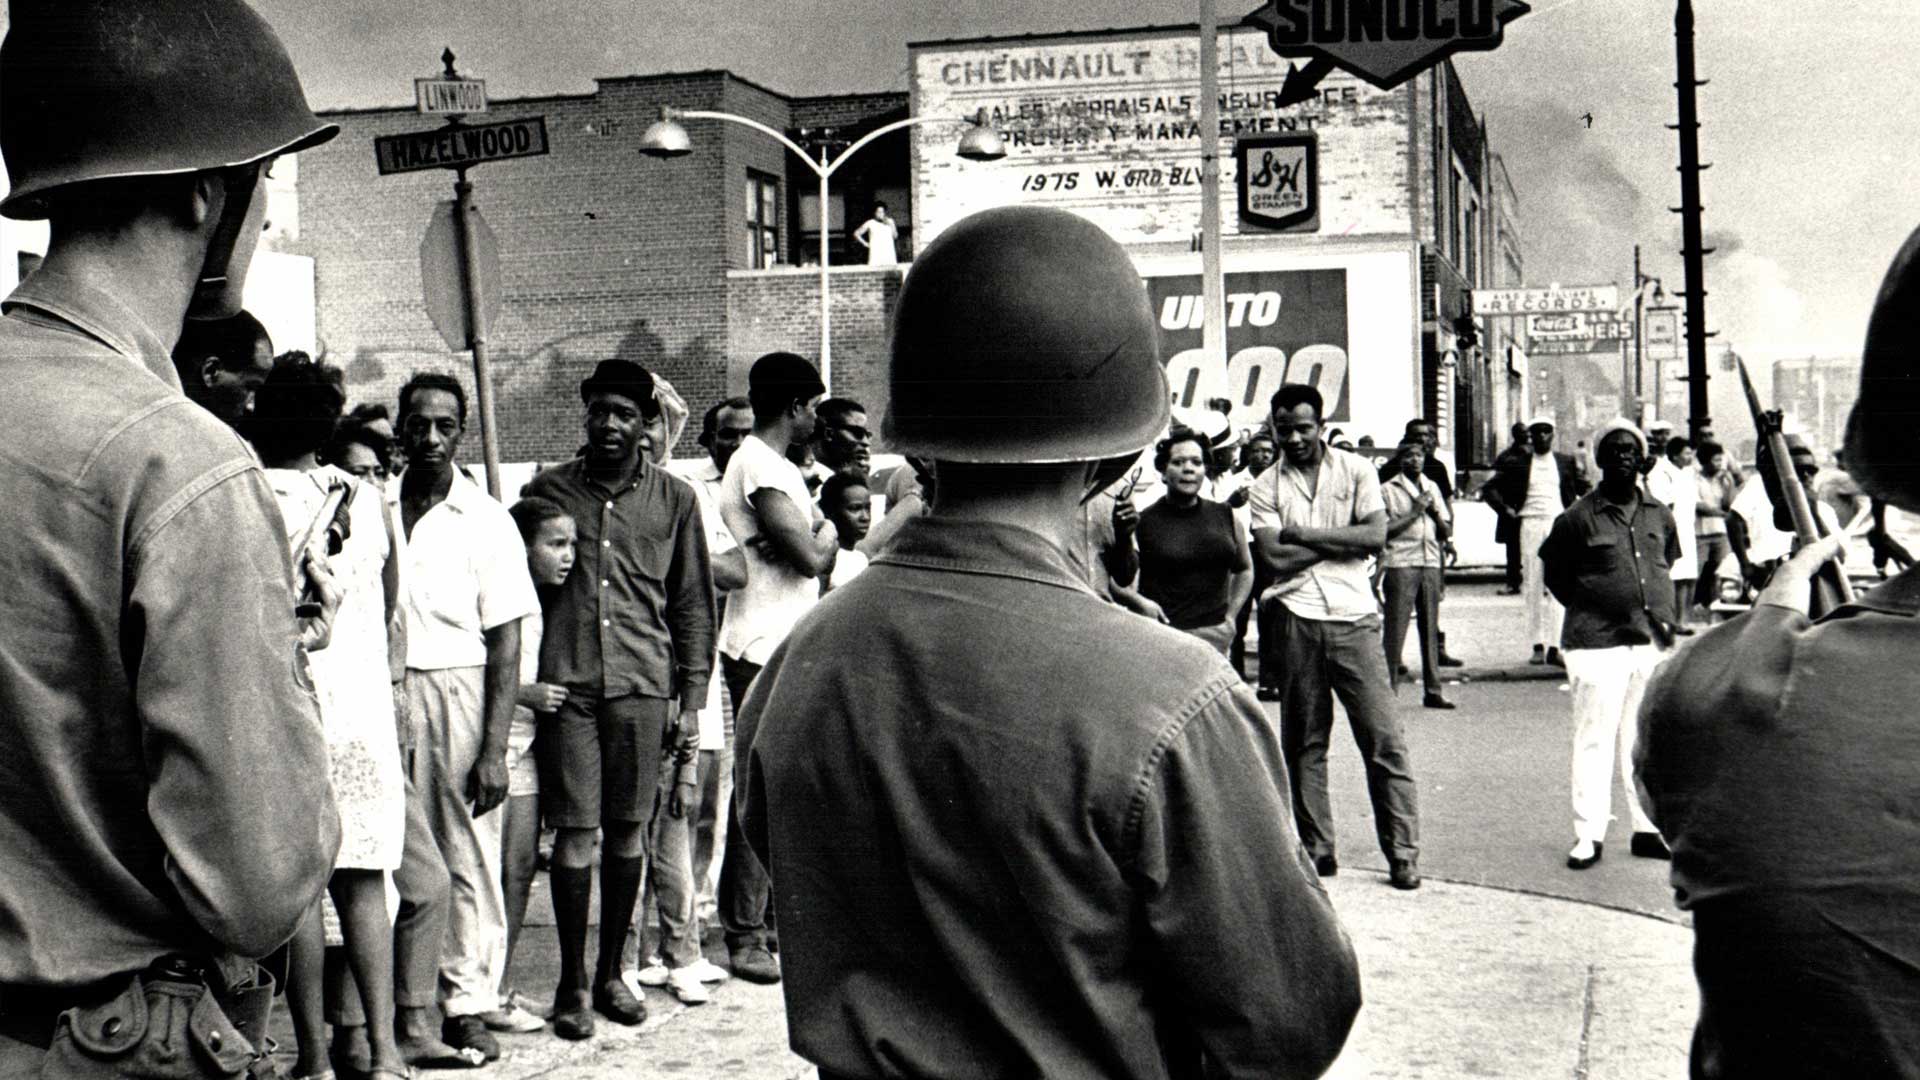 When US inner cities erupted in violence in 1967, LBJ created a commission to investigate.